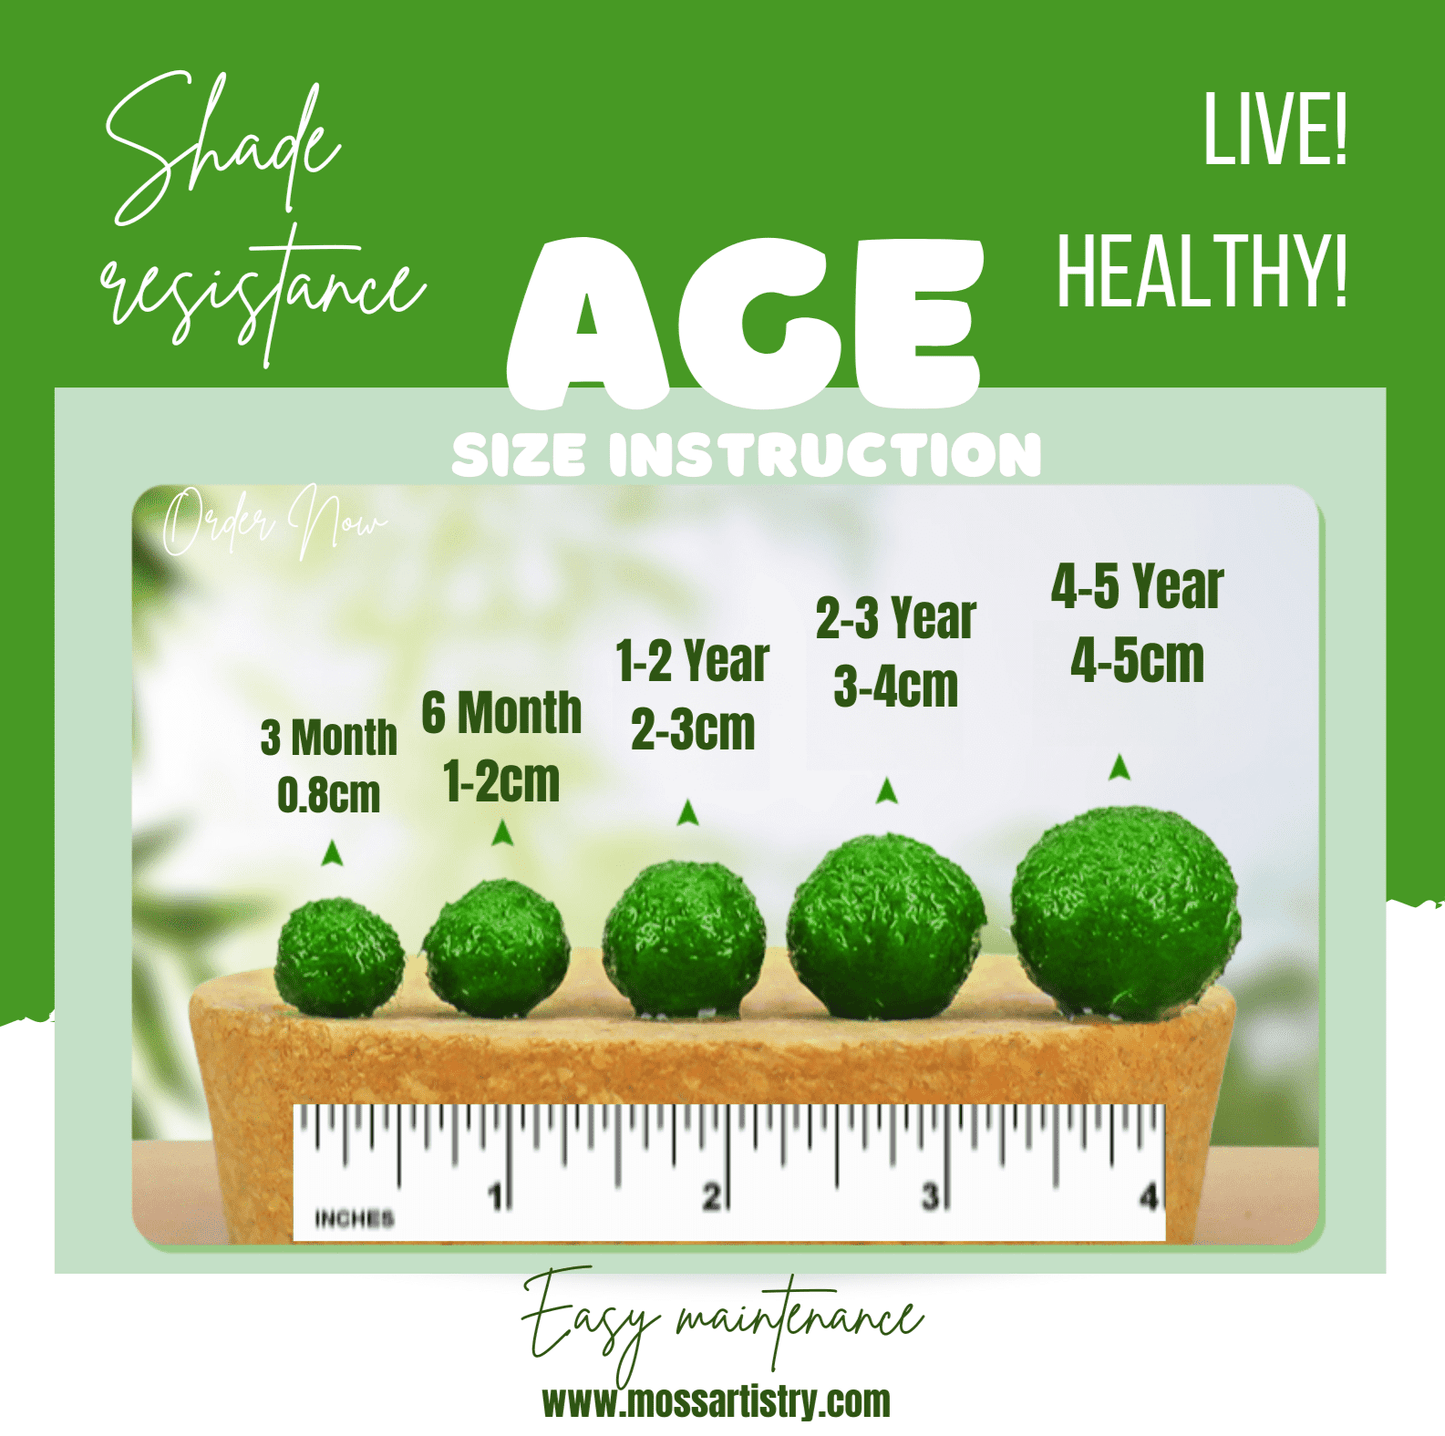 Large Marimo Moss Ball 1 pc 4-5cm LIVE Marimo Moss Ball Pet - JapaneseLive not Plastic
4-5 yrs 4-5cm LIVE Marimo Moss Ball Pet
~ 5cm
100% Real and Live Guaranteed - Moss Artistry
Moss Ball can survive in shadows, however, some sunshine